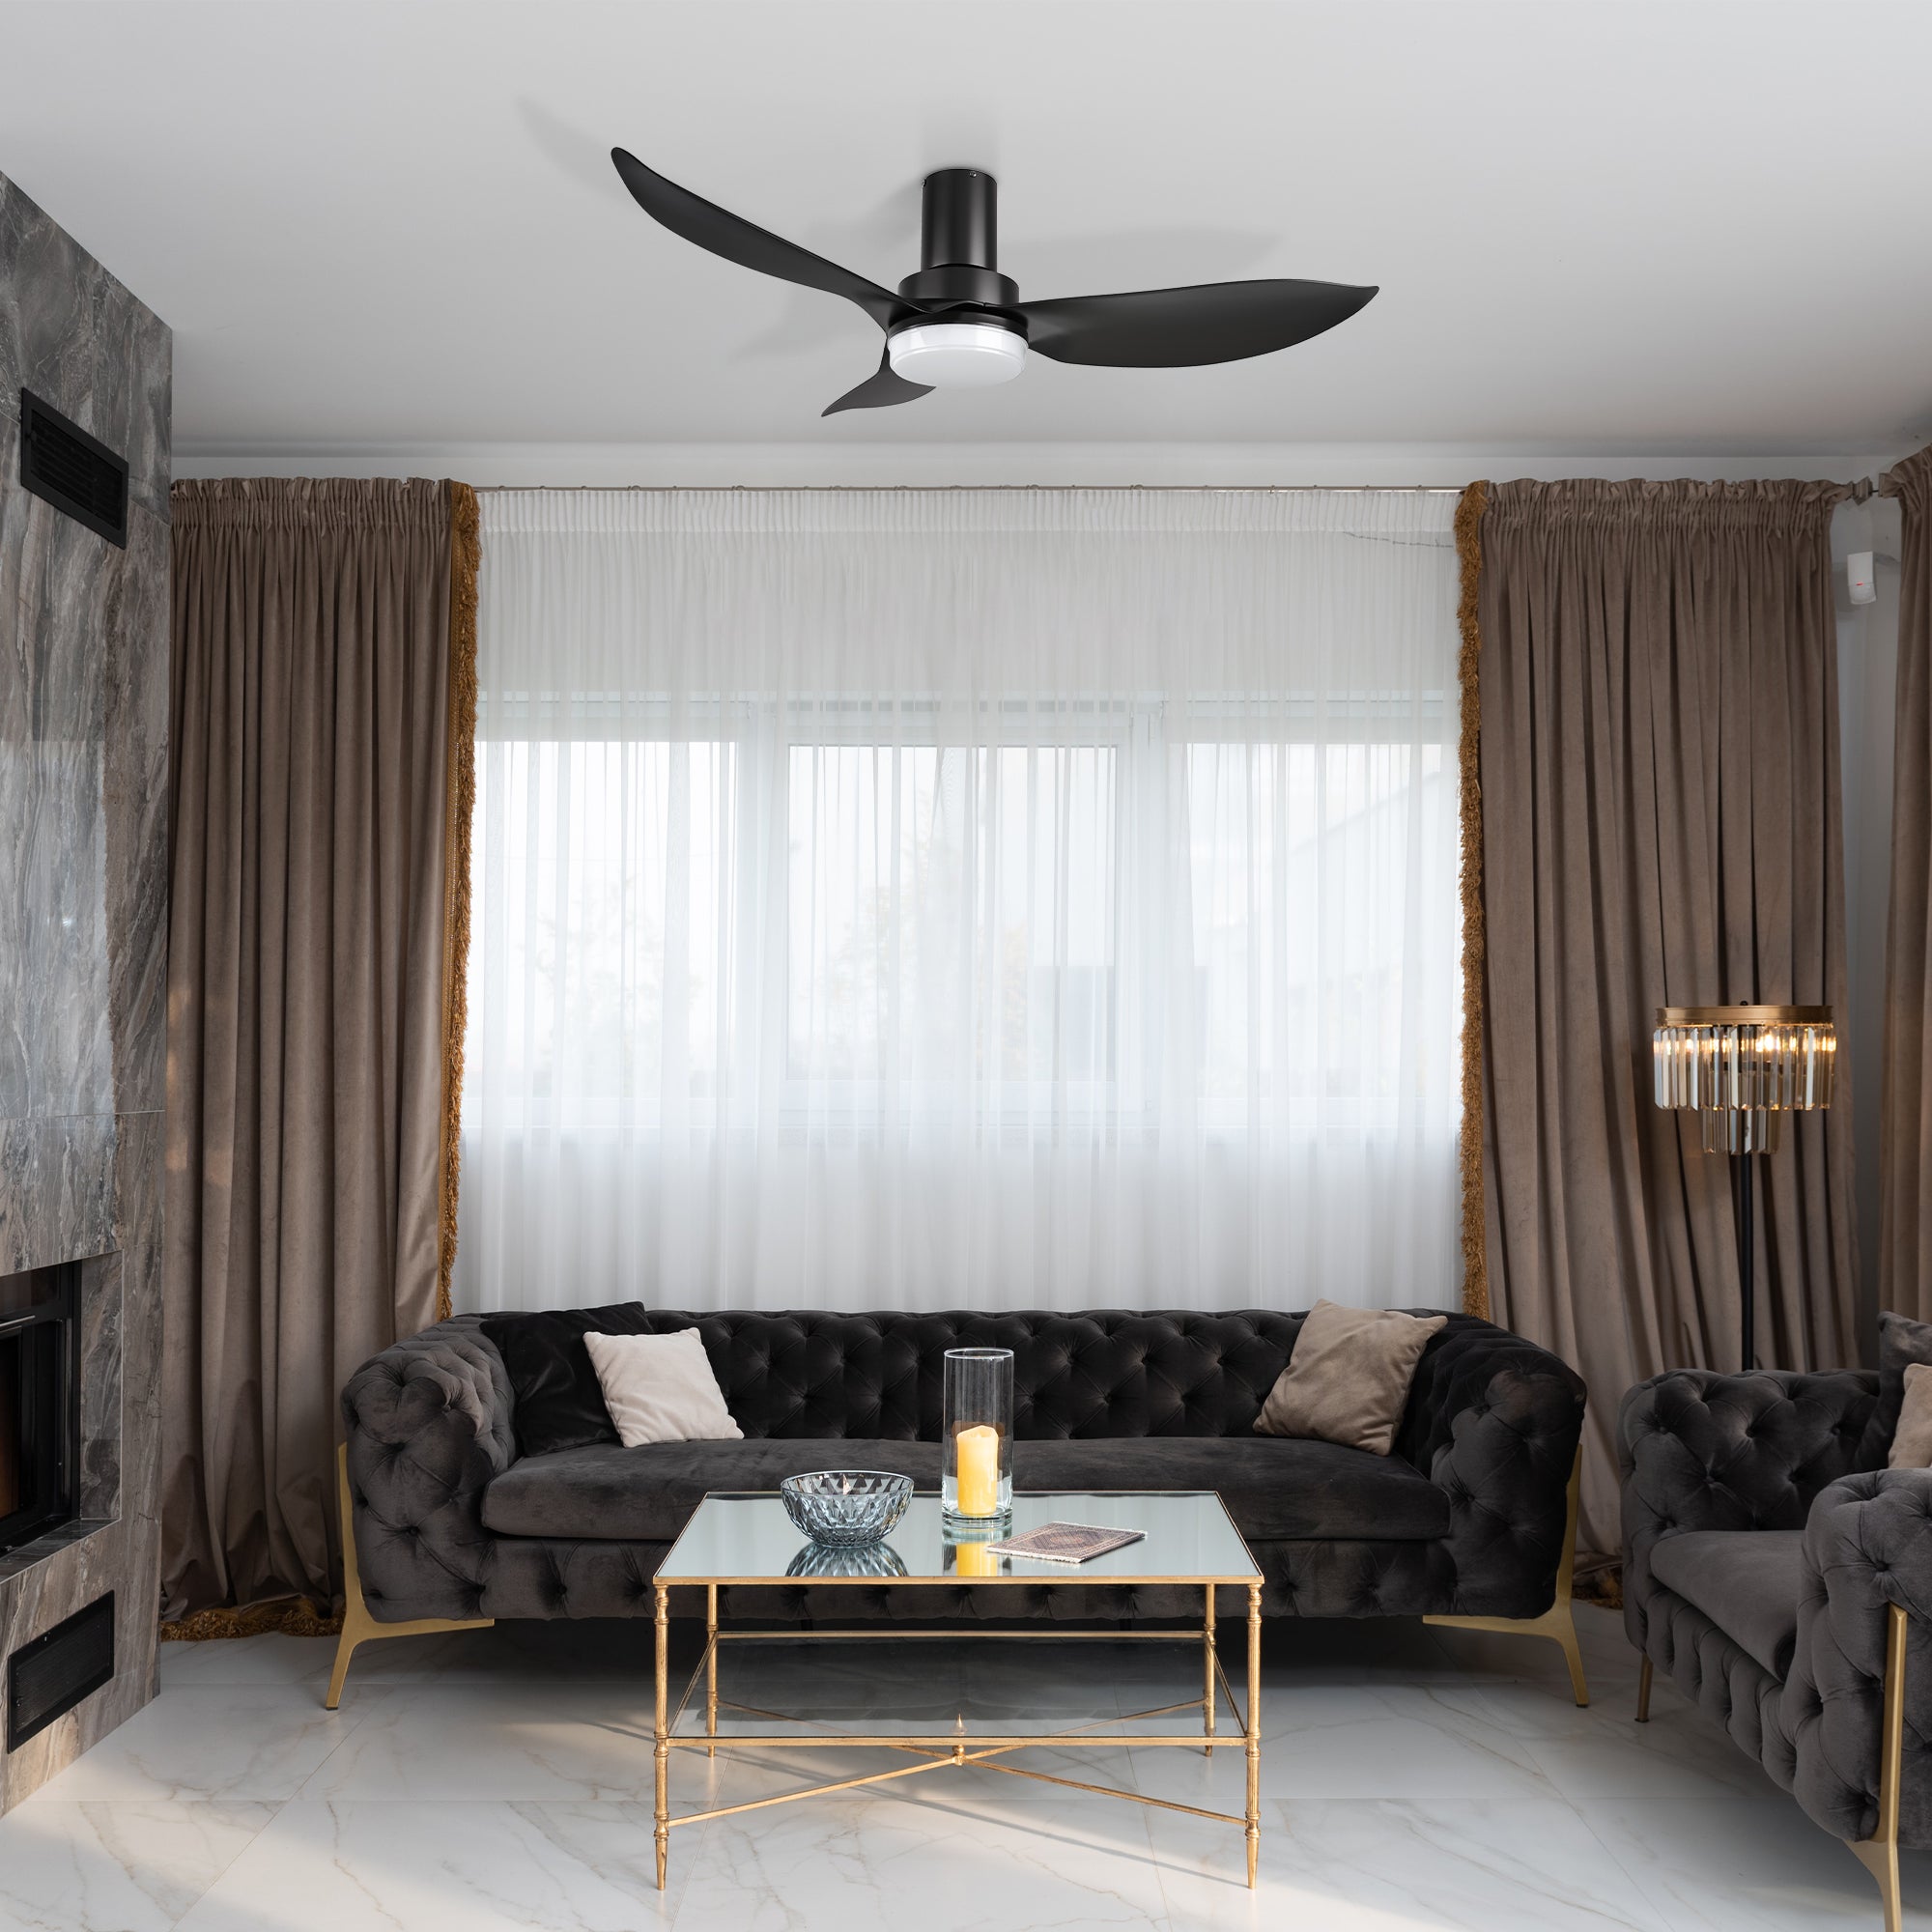 This Prescott 45'' smart ceiling fan keeps your space cool, bright, and stylish. It is a soft modern masterpiece perfect for your indoor living spaces. This Wifi smart ceiling fan is a simplicity designing with White finish, use very strong ABS blades and has an integrated 4000K LED daylight. The fan features Remote control, Wi-Fi apps, Siri Shortcut and Voice control technology (compatible with Amazon Alexa and Google Home Assistant ) to set fan preferences.#color_Black